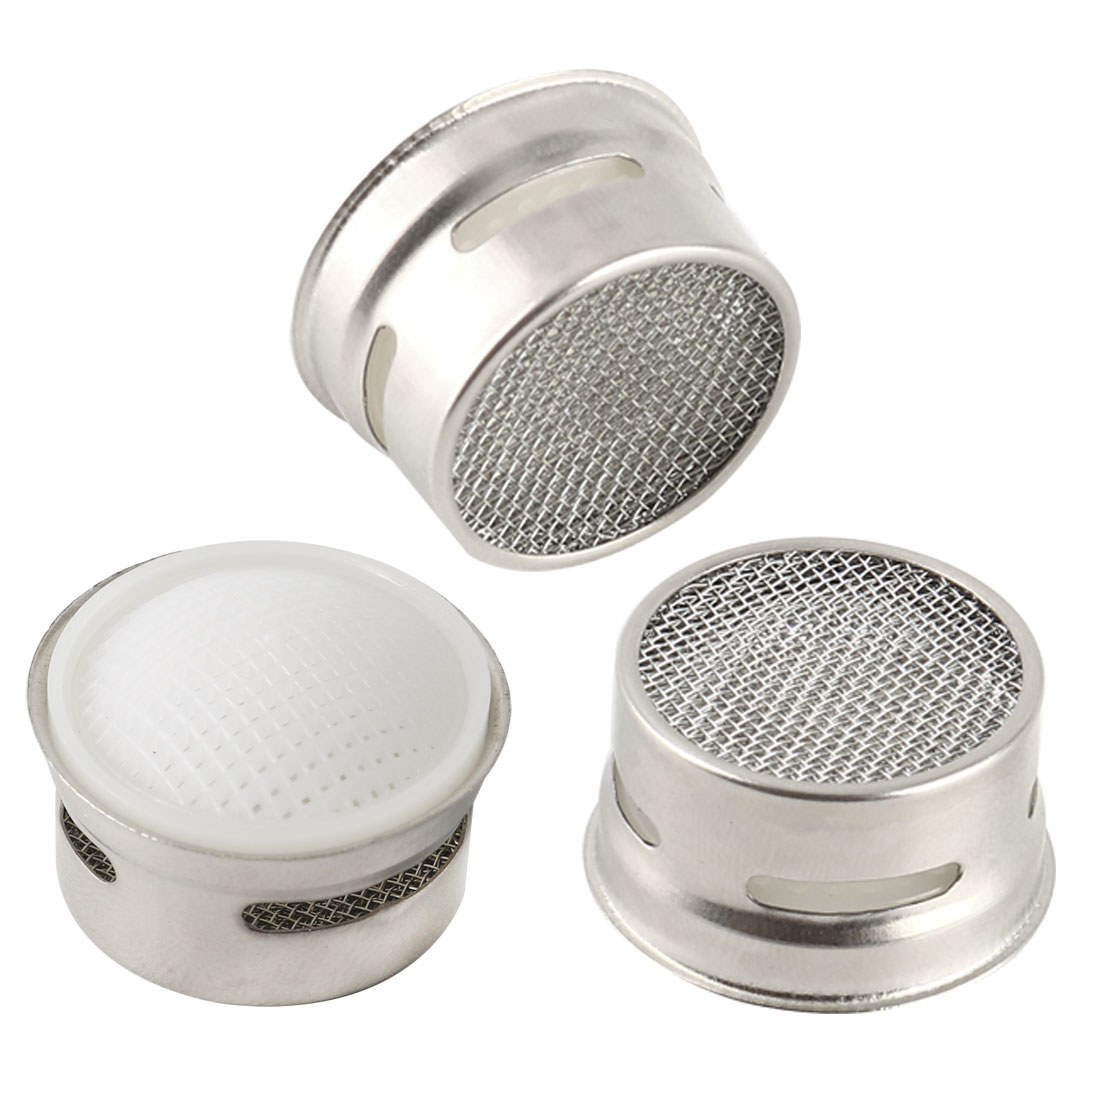 Unique Bargains 3pcs 21mm Stainless Steel Faucet Aerator Insert Water Filter Accessory